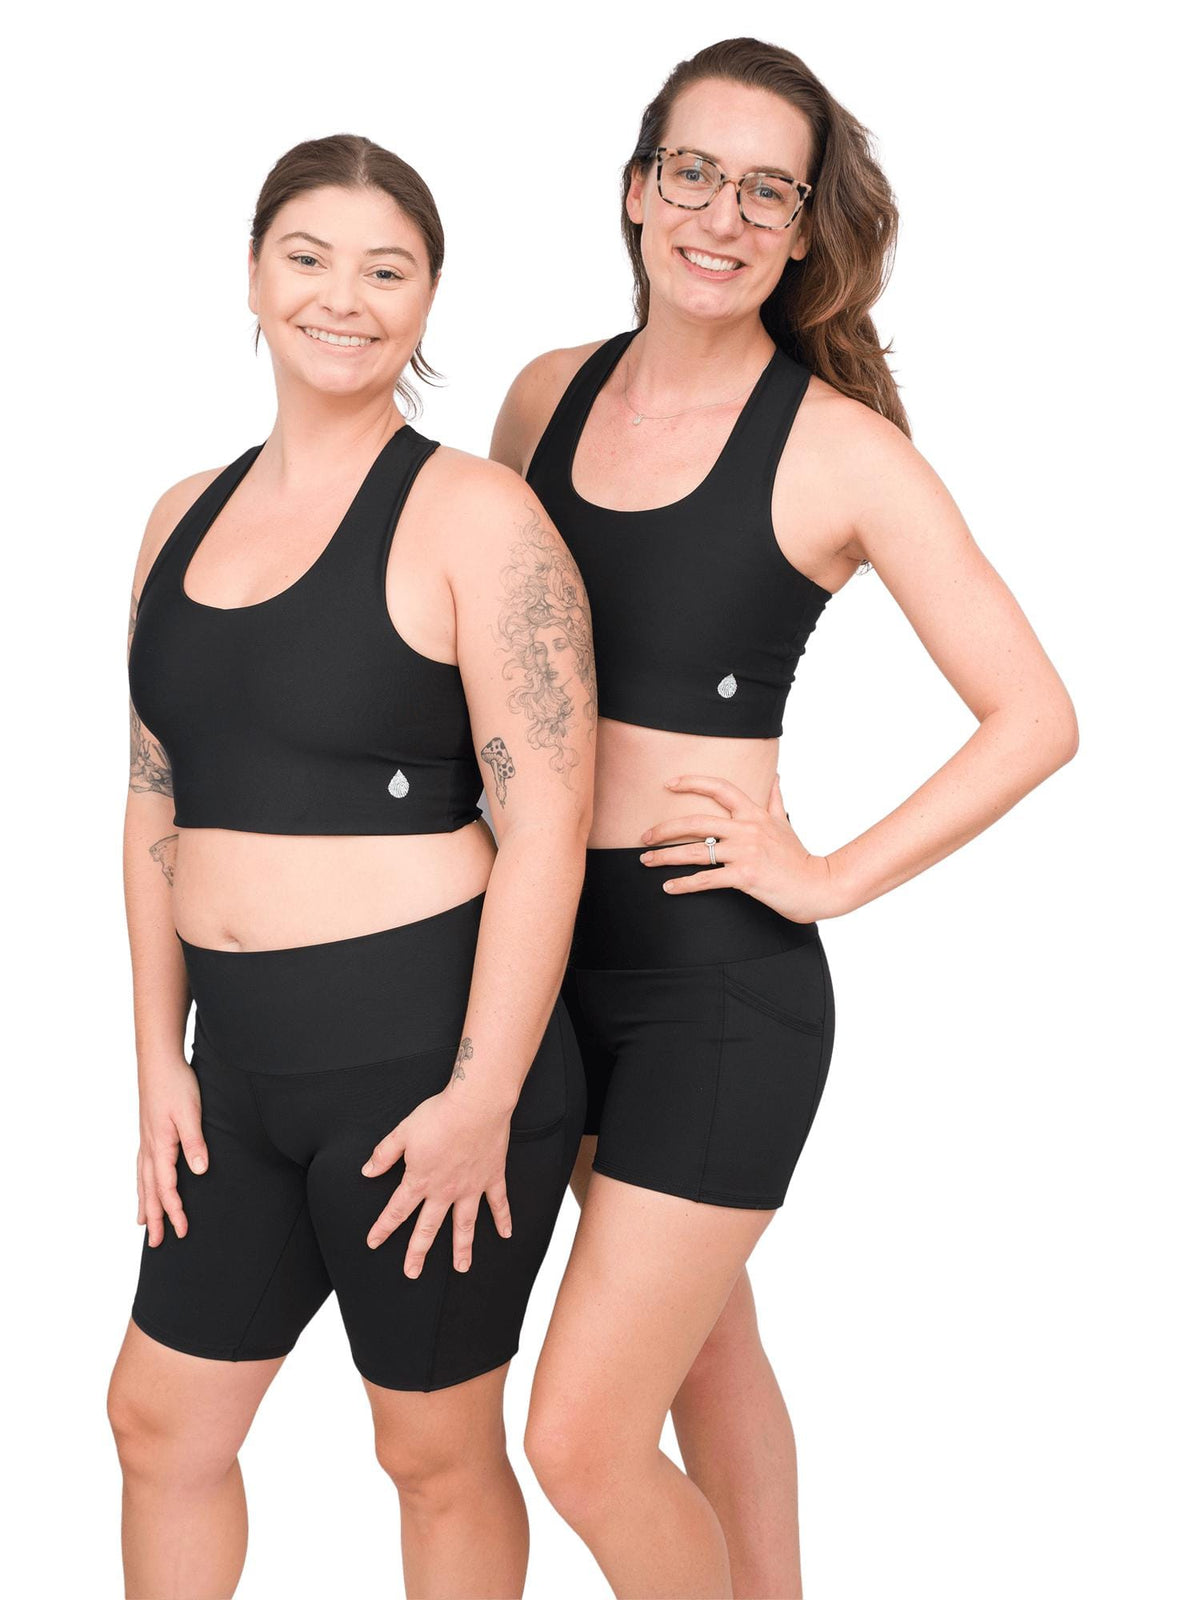 Model: Camilla (left) is 5&#39;8&quot;, 180 lbs, 36B and wearing a size L shorts and L top. Laura (right) is 5&#39;11&quot;, 150lbs, 34B, and wearing a size M top and M shorts.